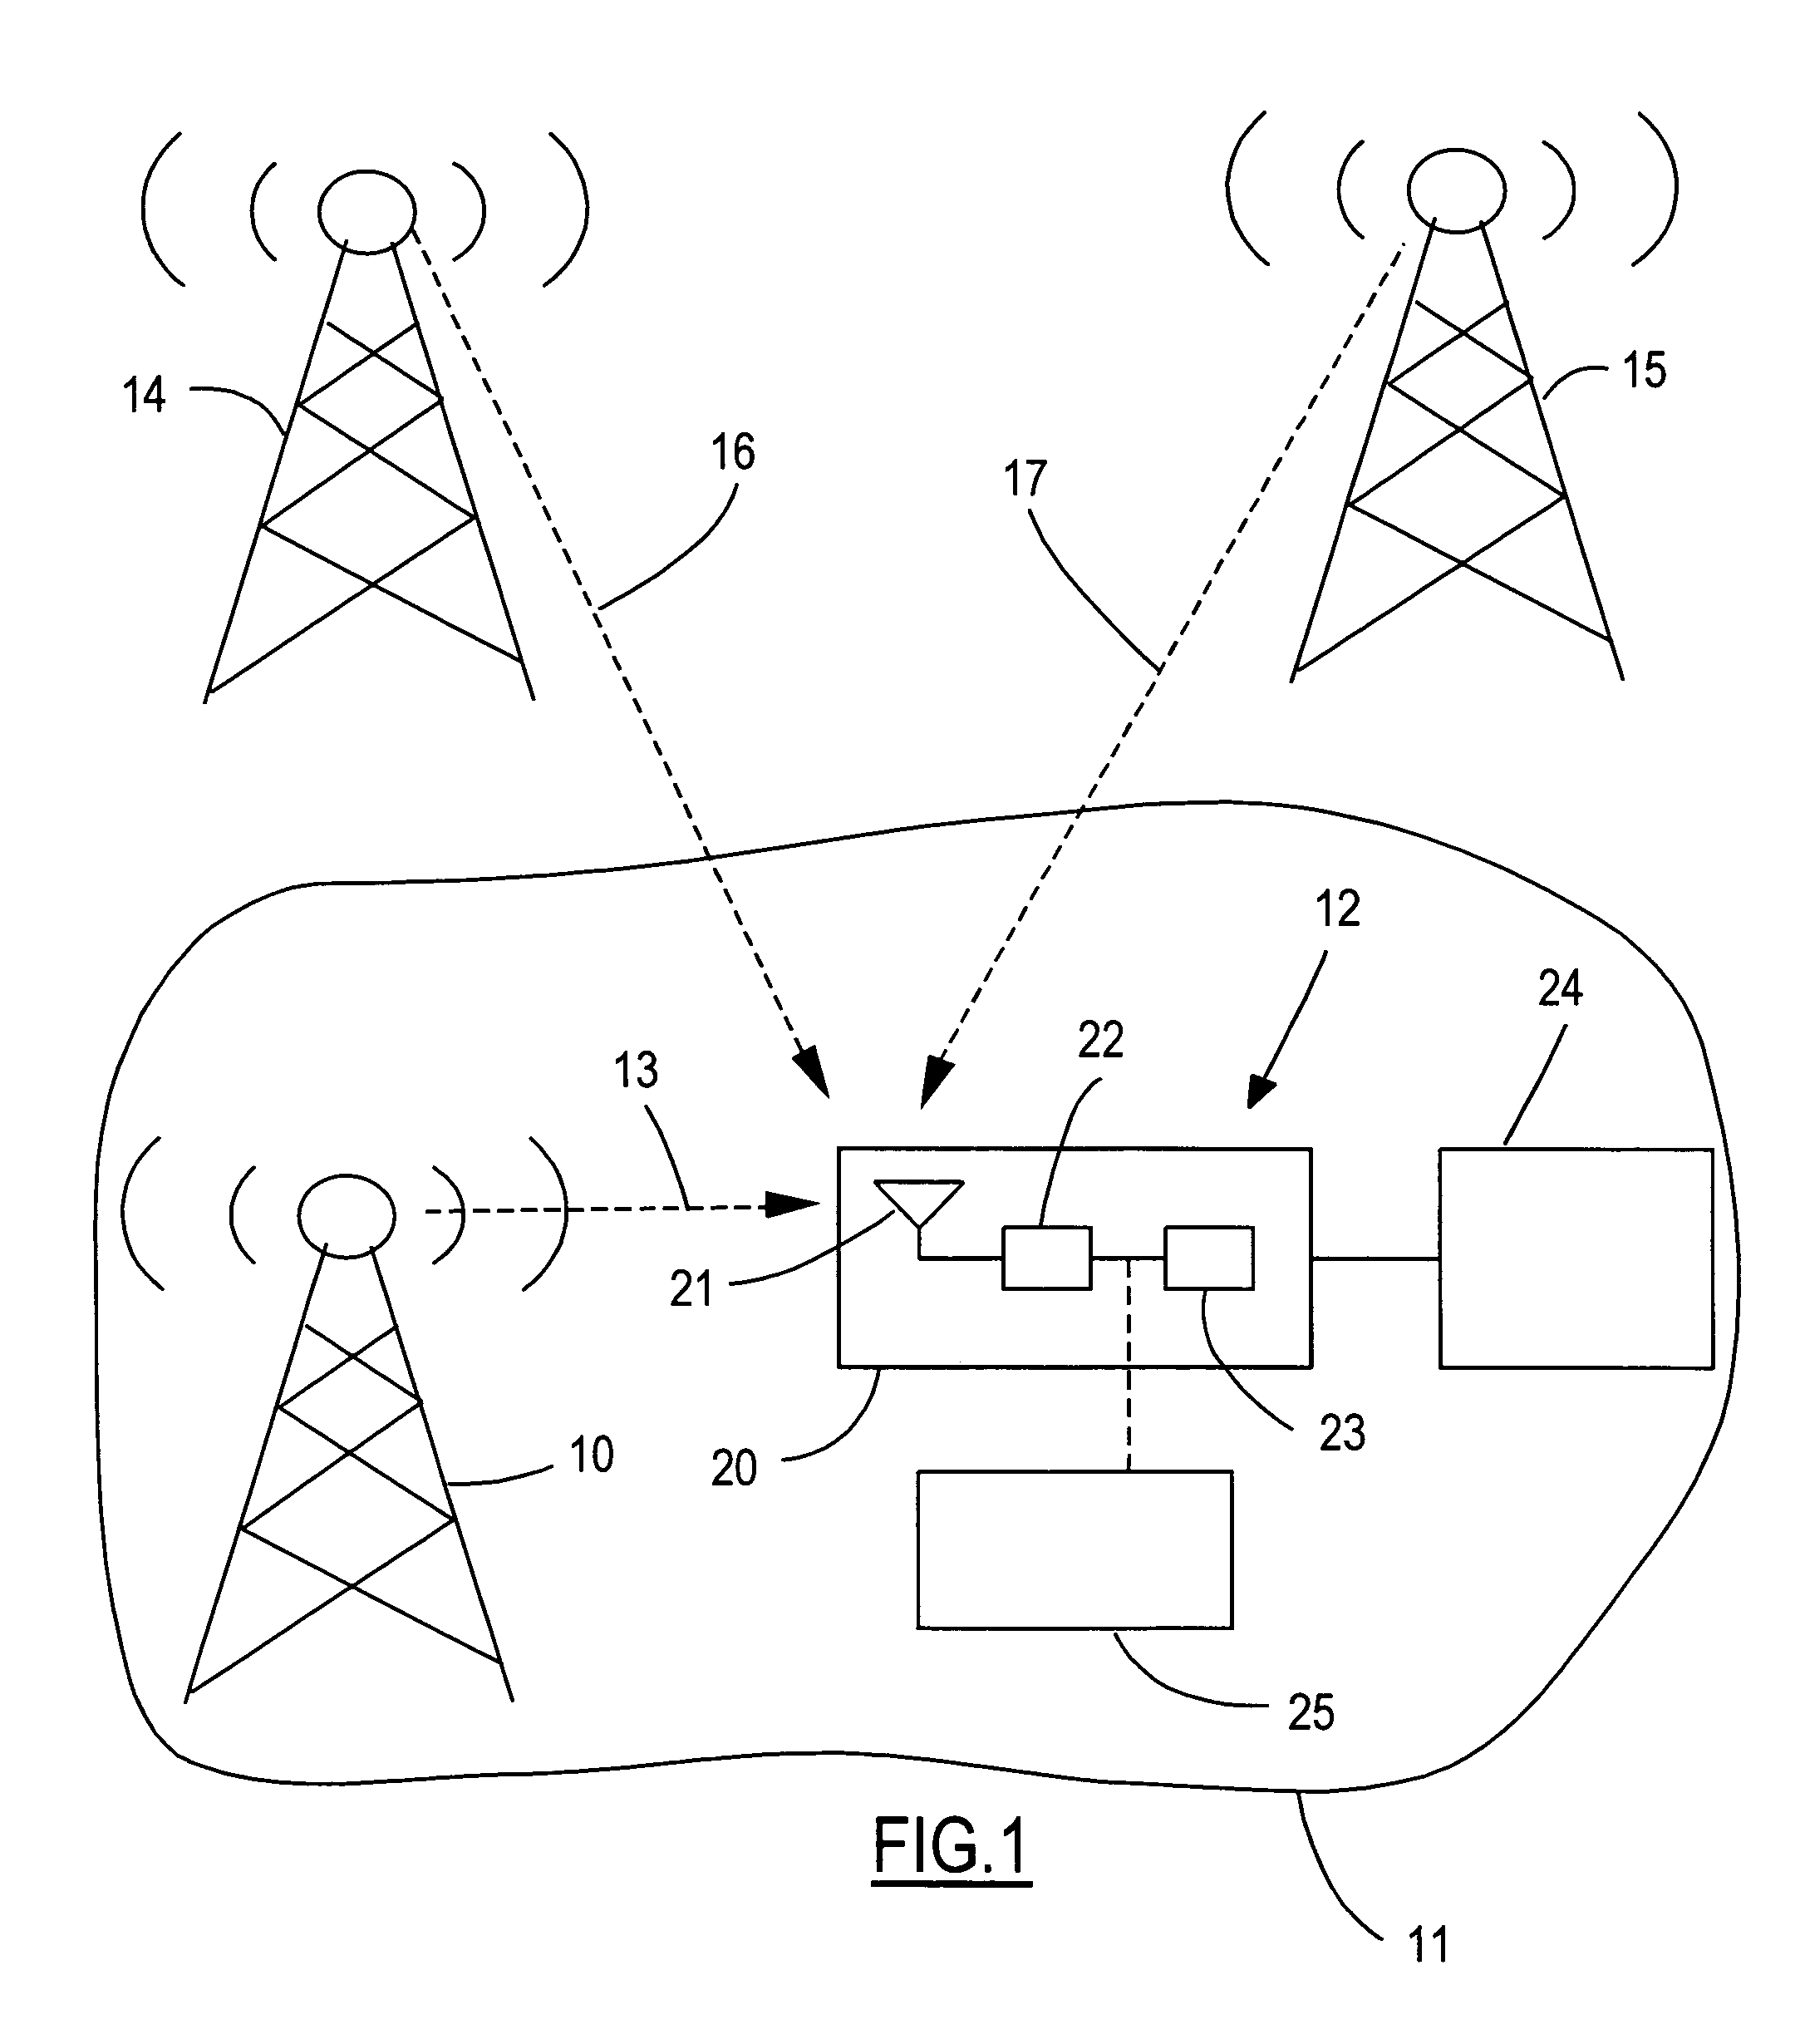 Measurement system for determining desired/undesired ratio of wireless video signals